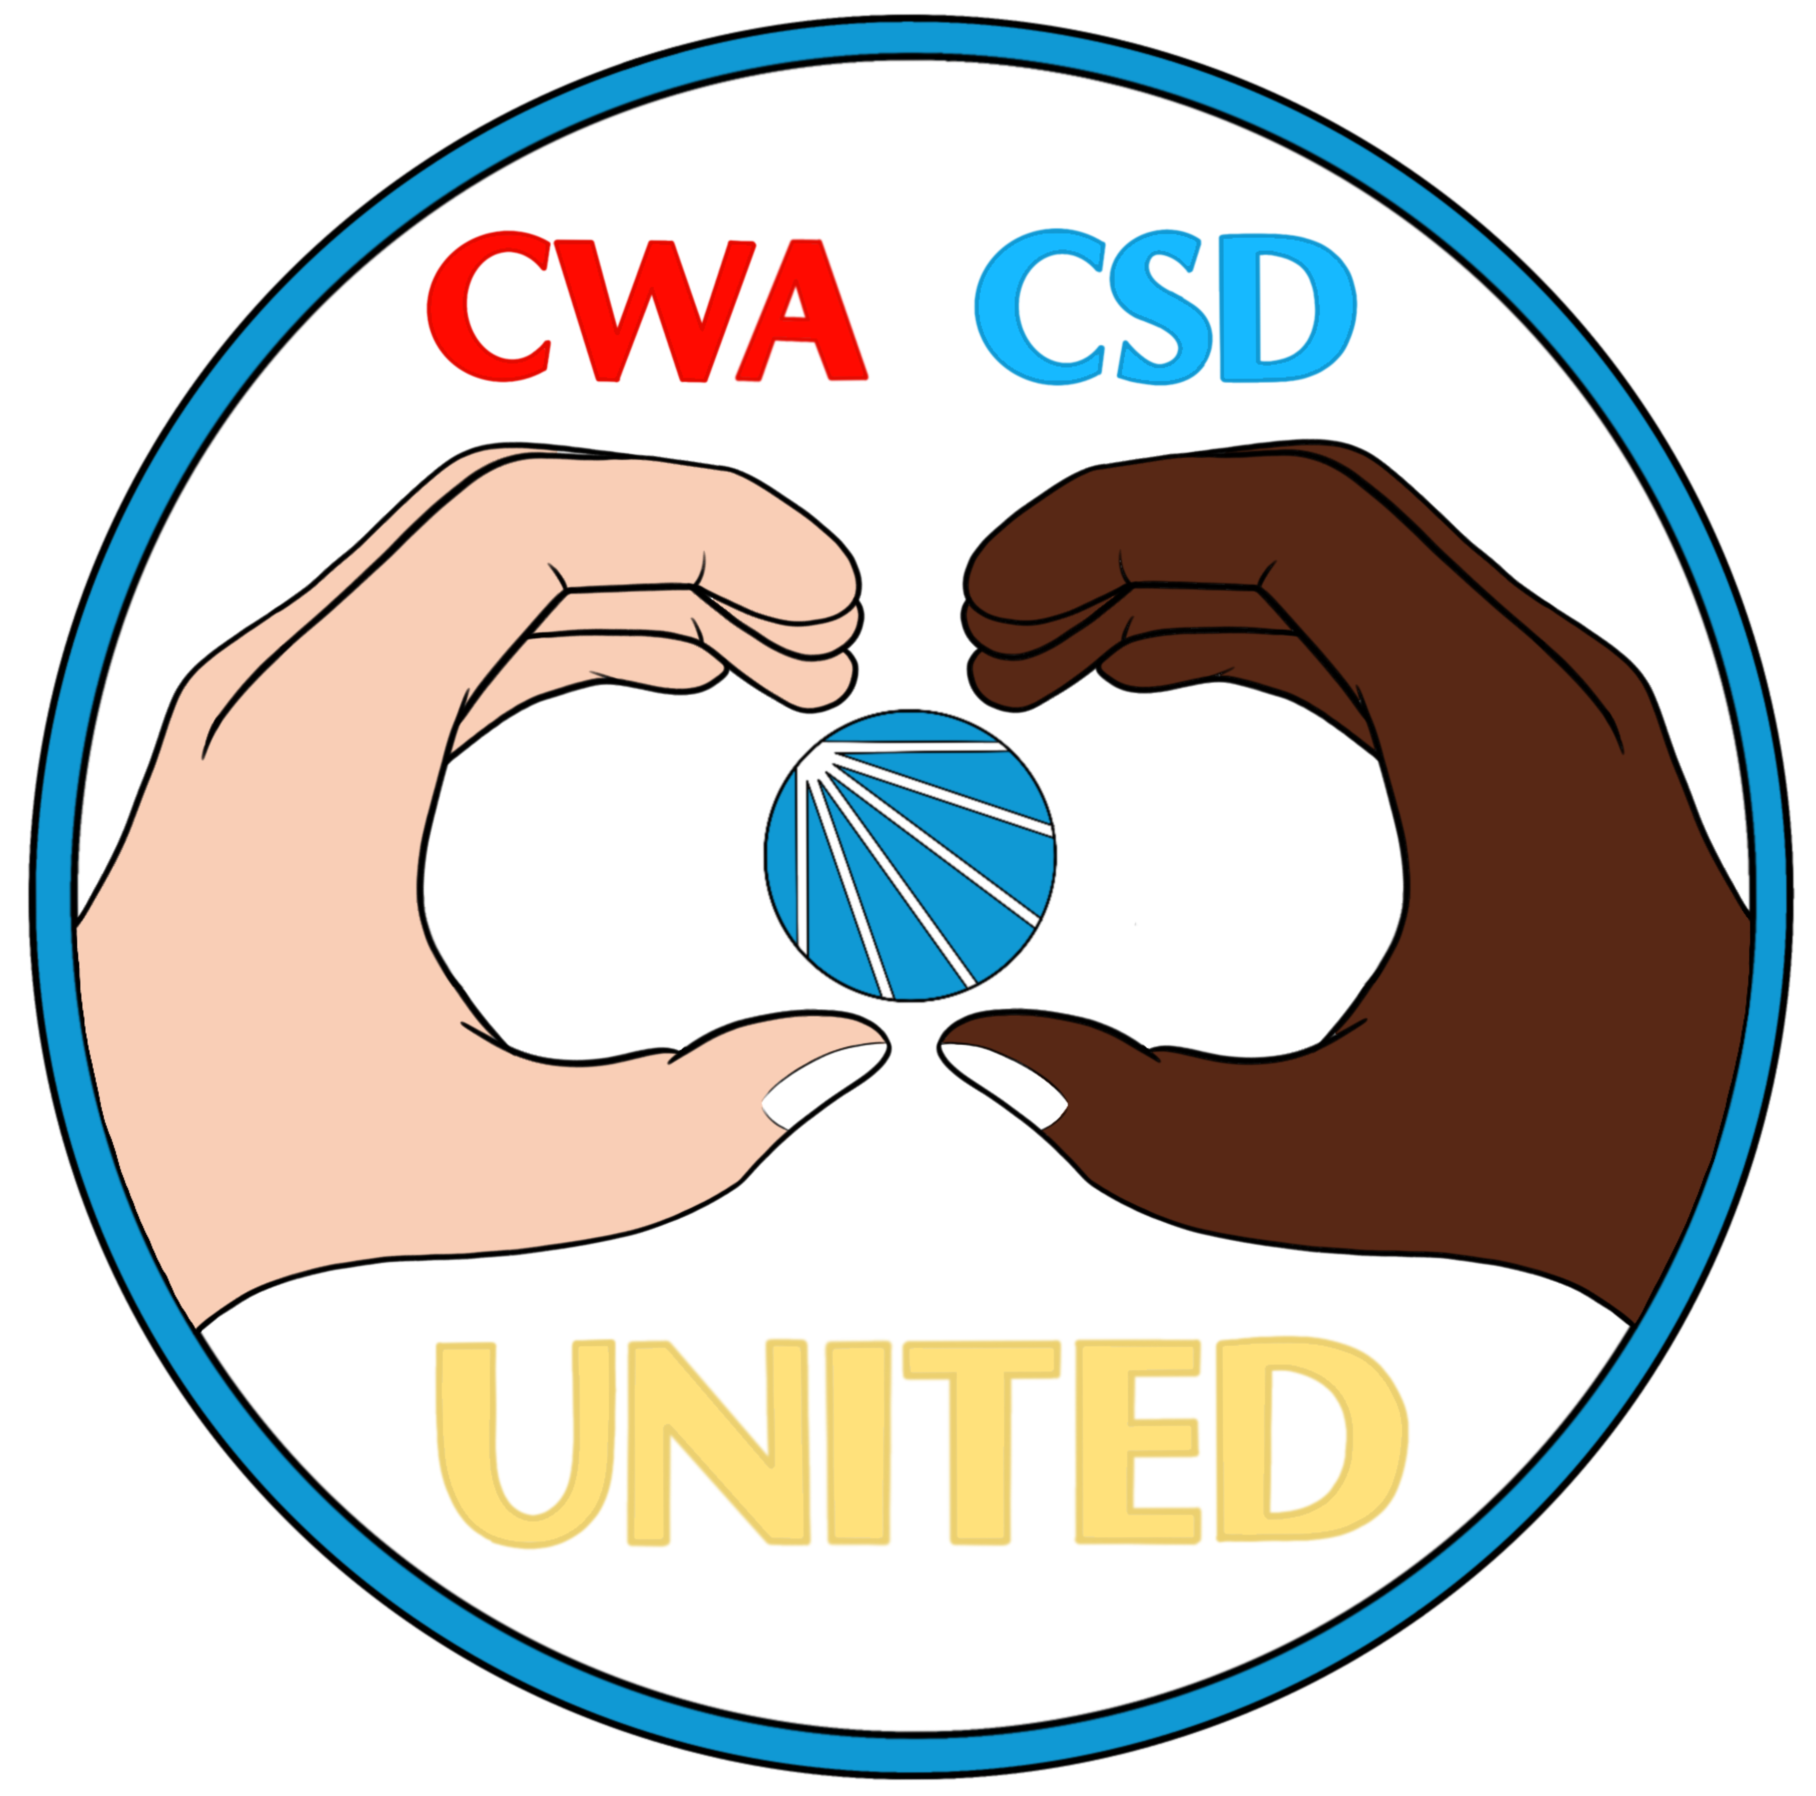 CWA-CSD Workers United